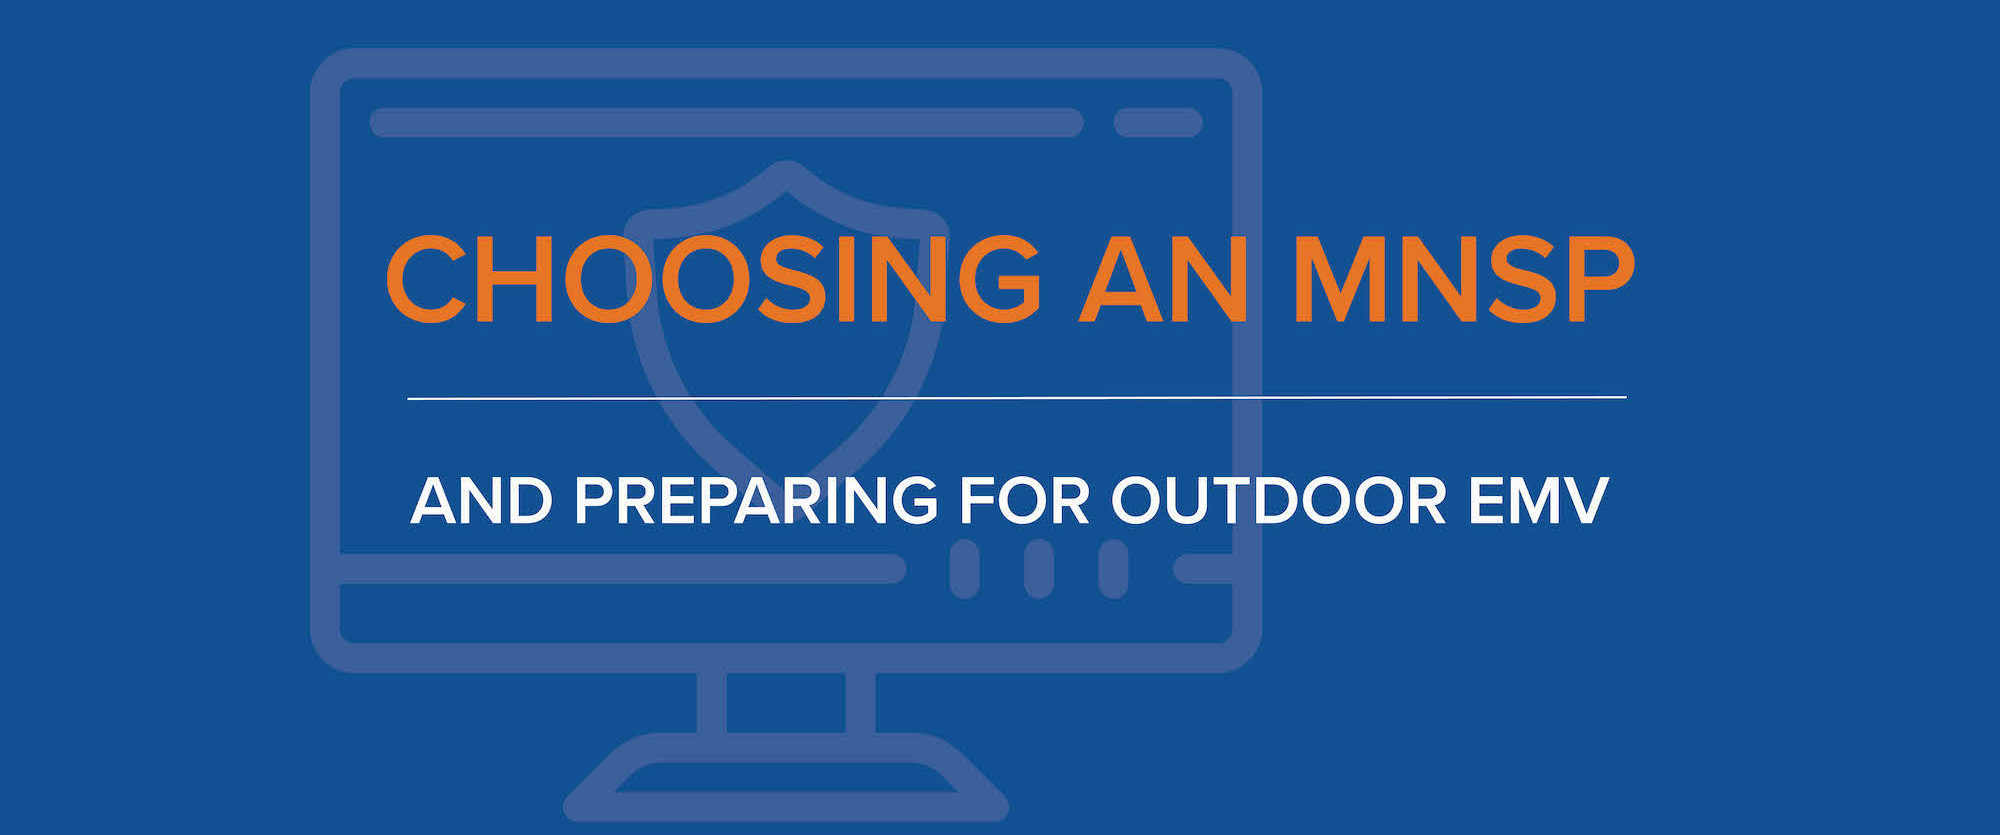 Choosing an MNSP and preparing for outdoor EMV image